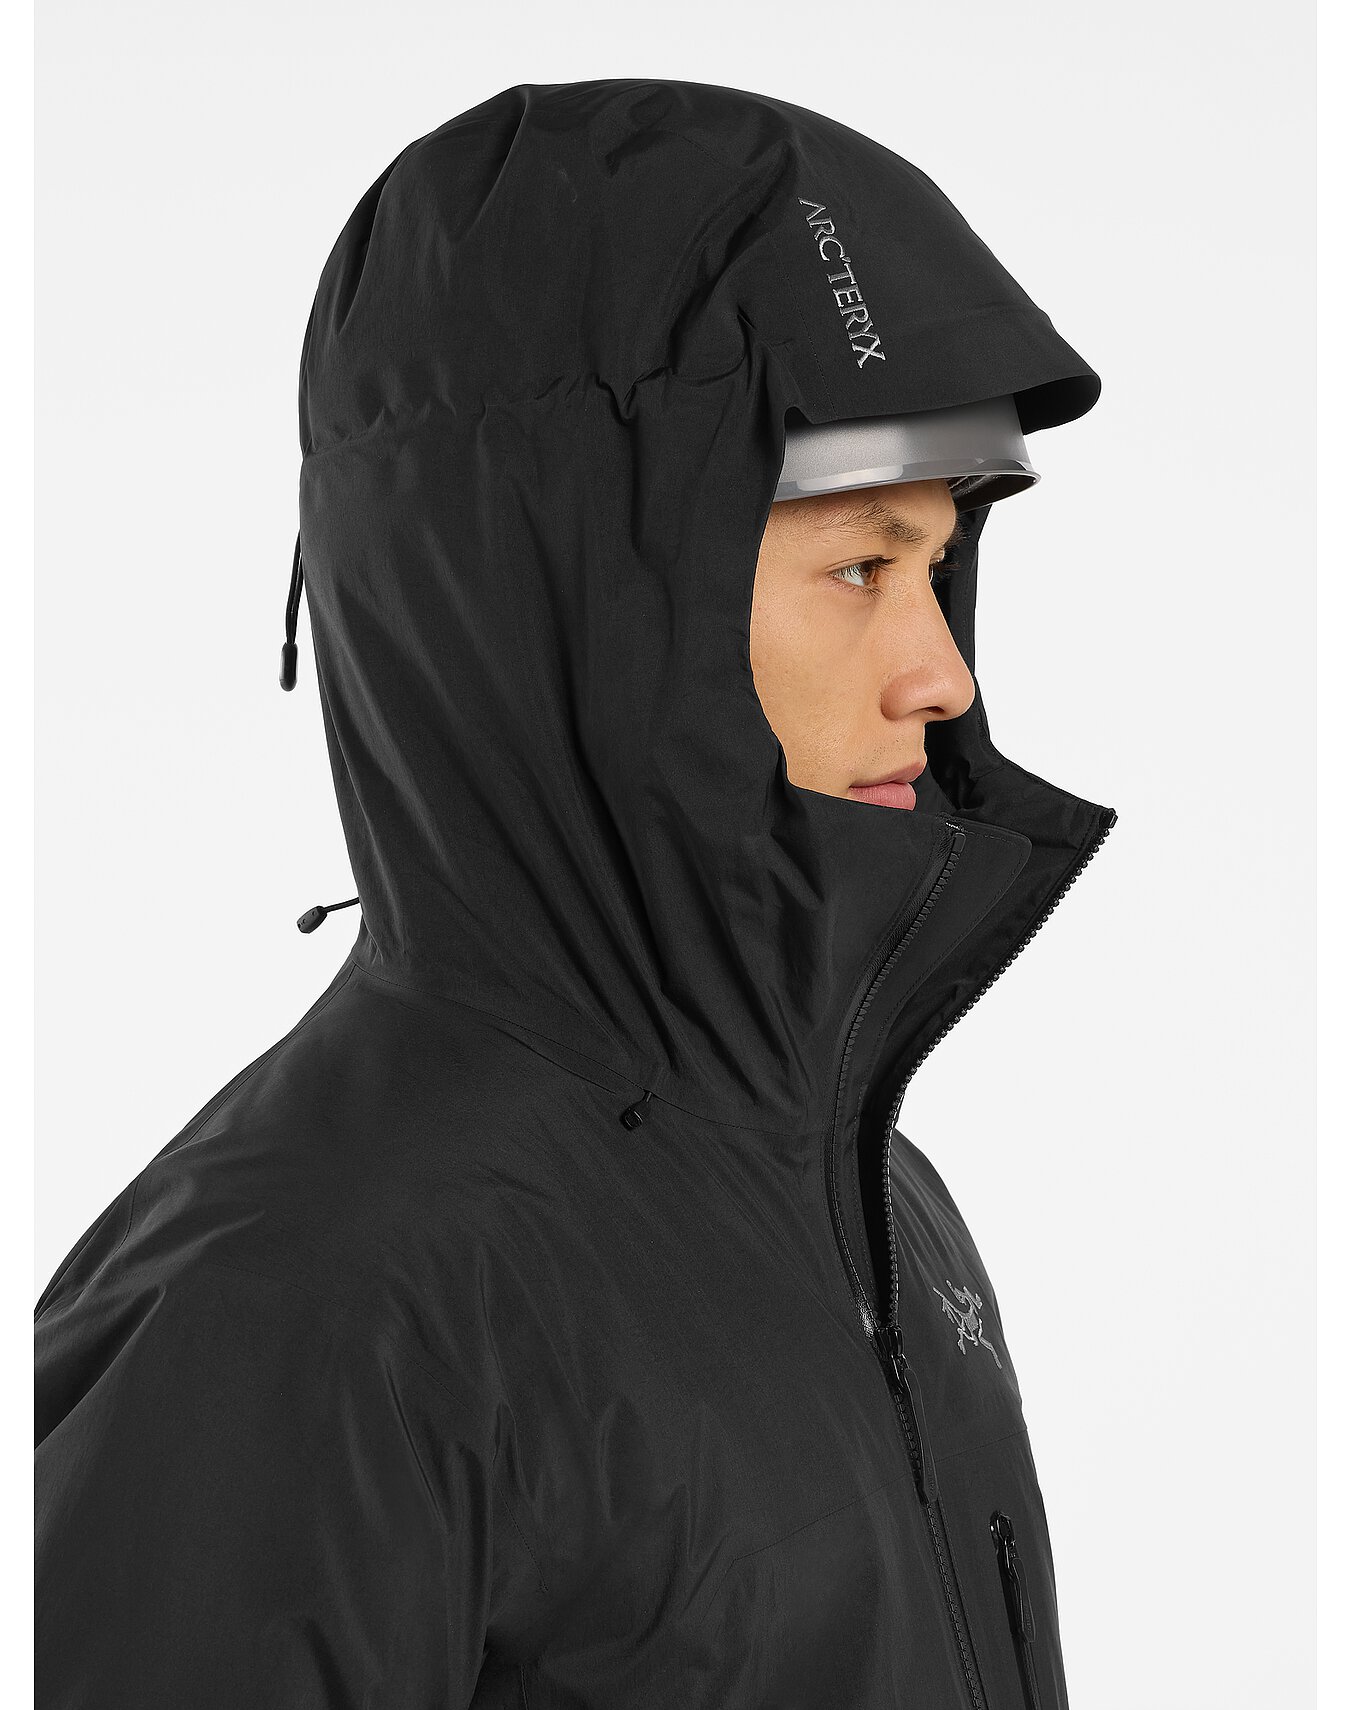 Beta Insulated Jacket Men's | Arc'teryx Outlet